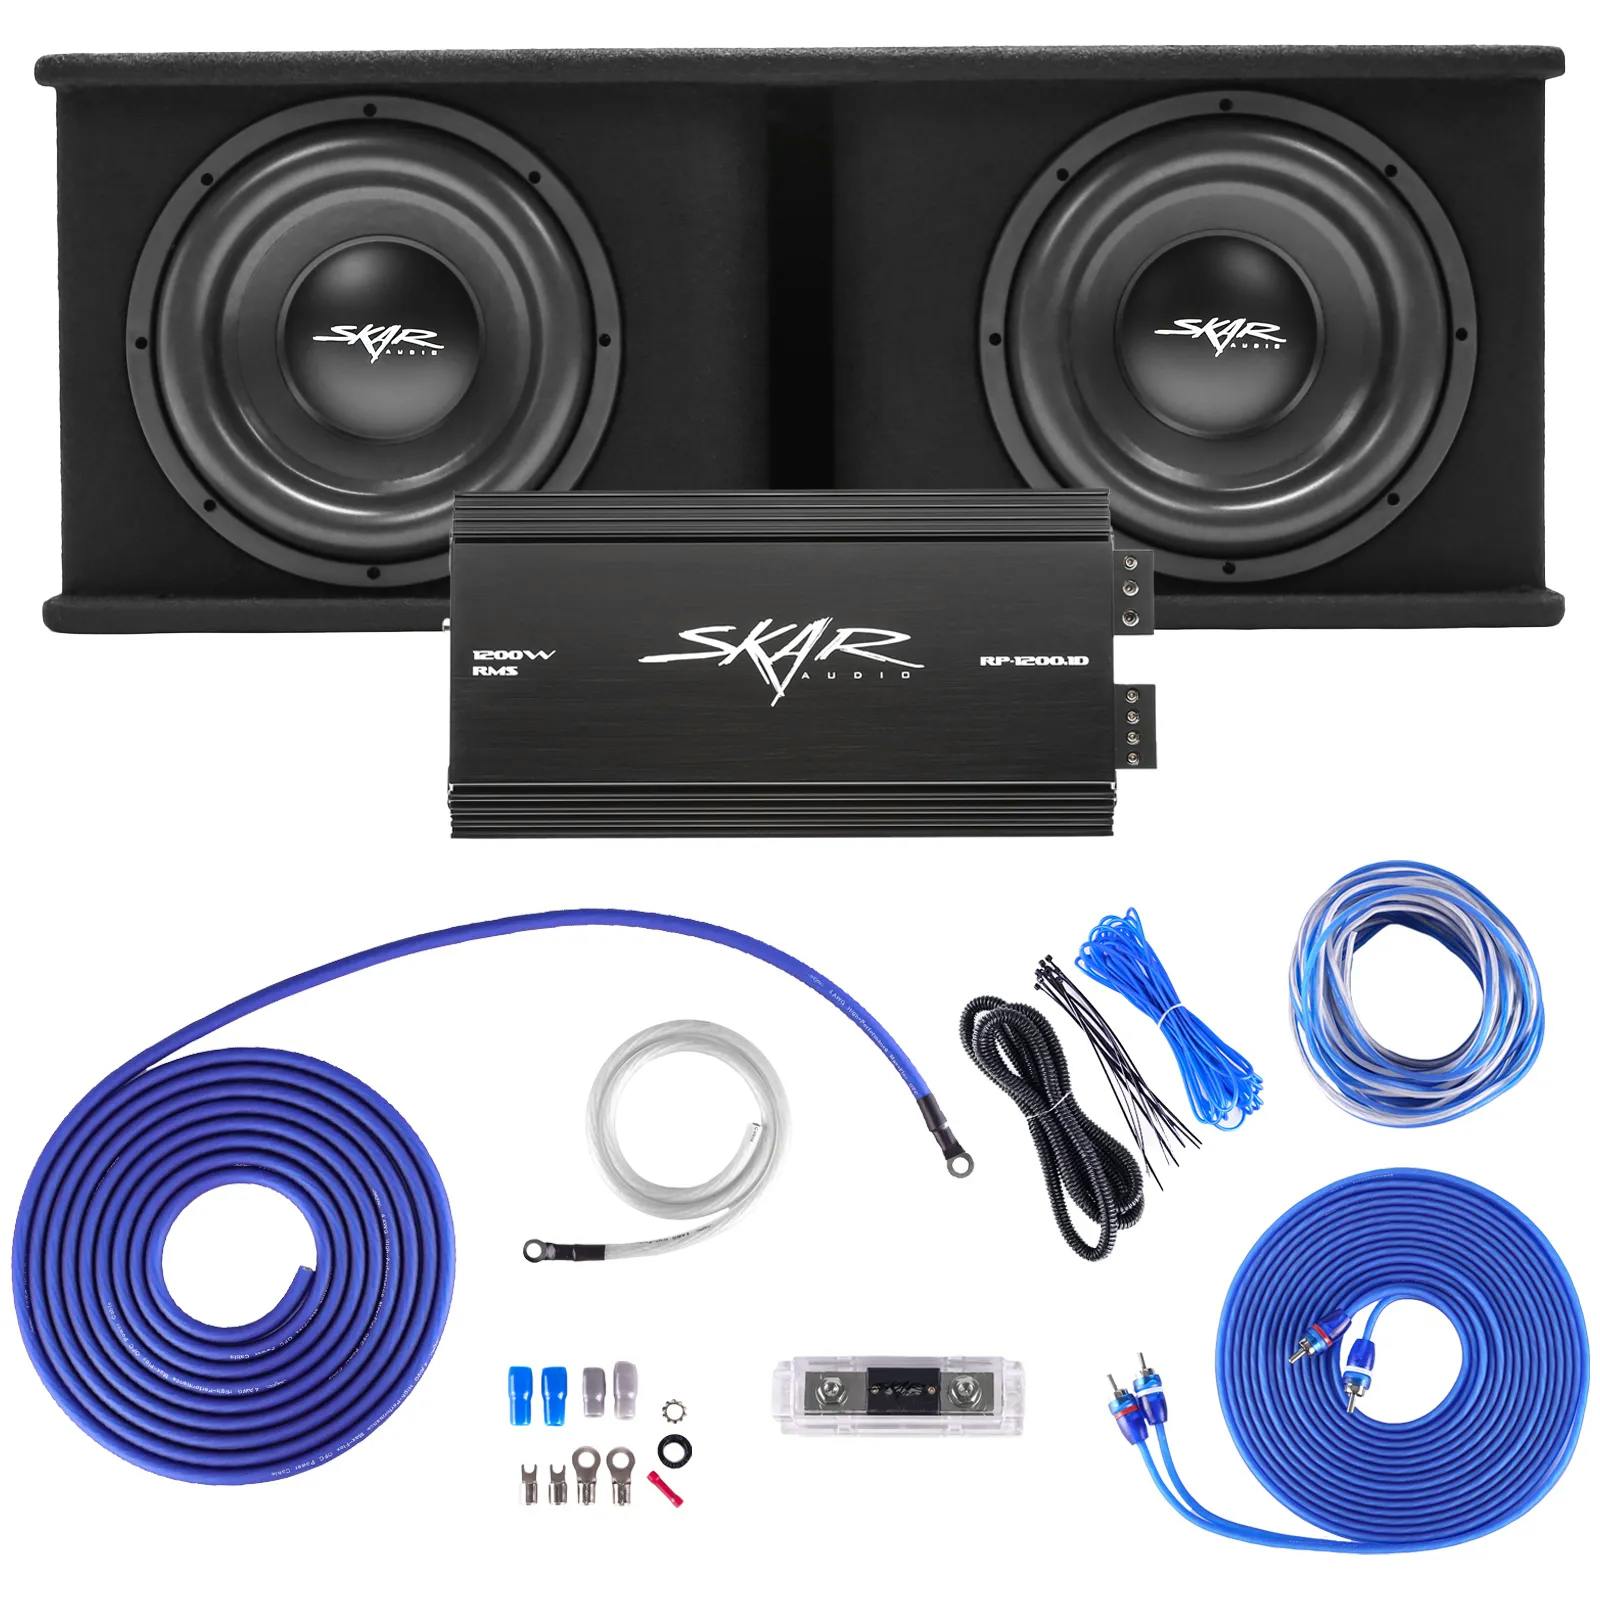 Featured Product Photo for Dual 12" 2,400 Watt SDR Series Complete Subwoofer Package with Vented Enclosure and Amplifier